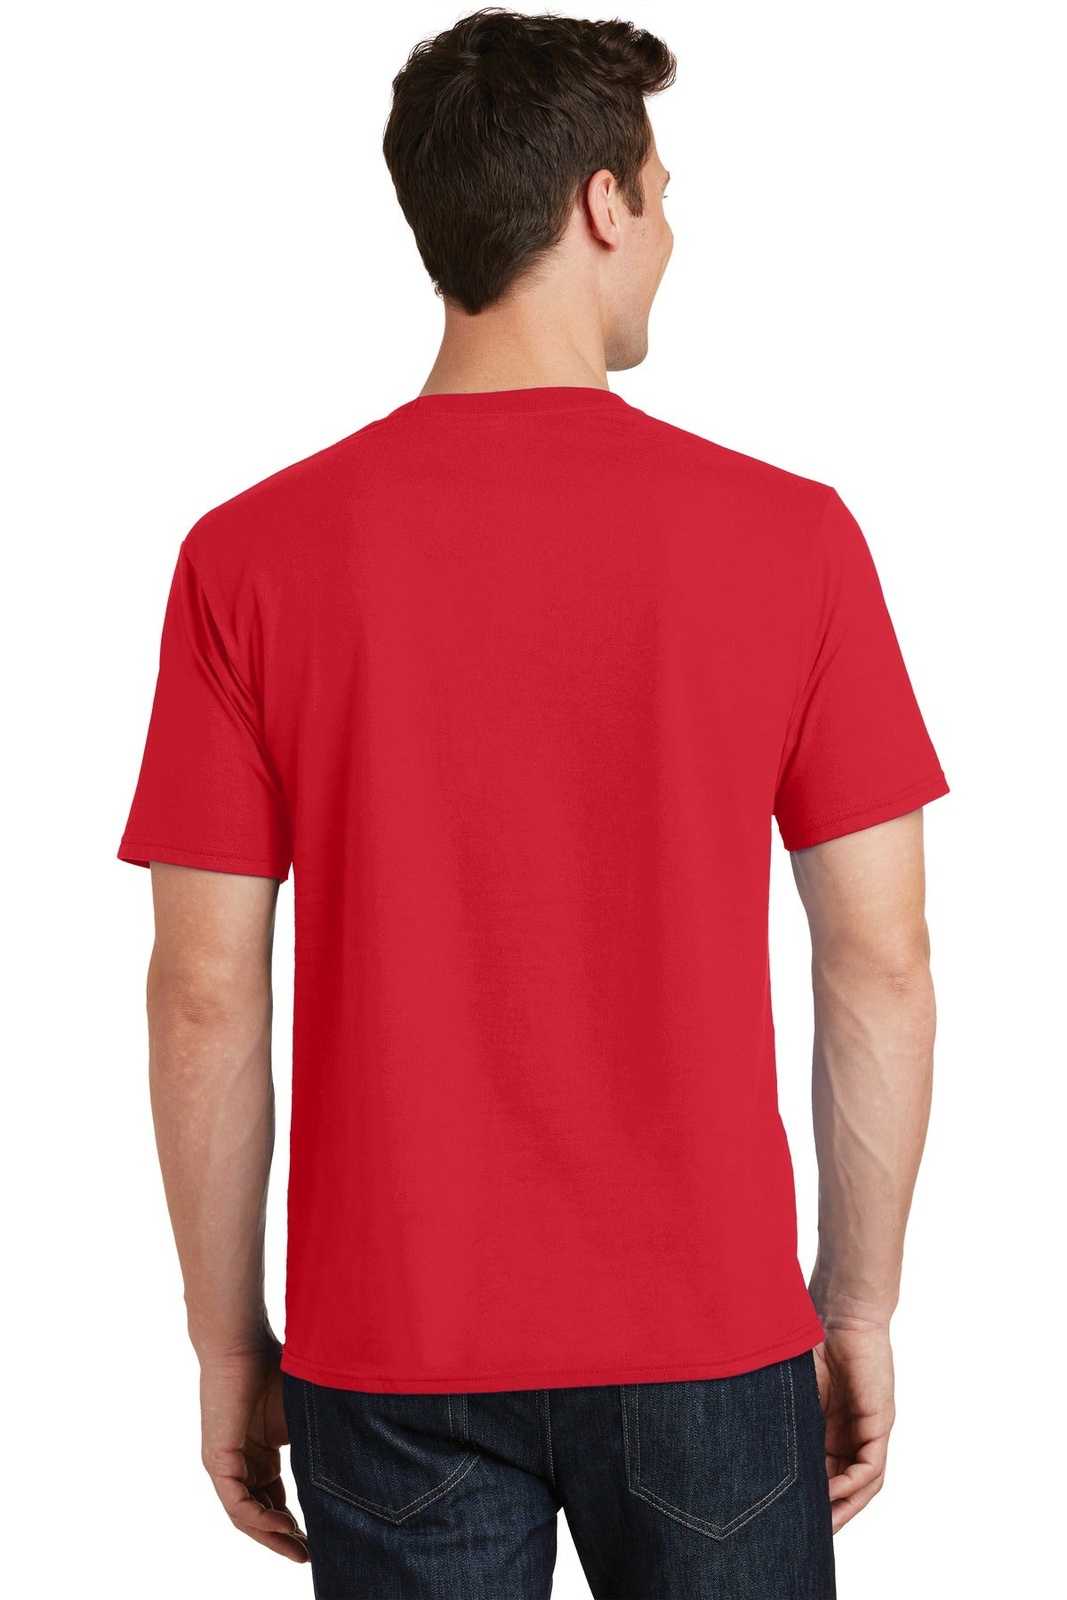 Port & Company PC450 Fan Favorite Tee - Athletic Red - HIT a Double - 1